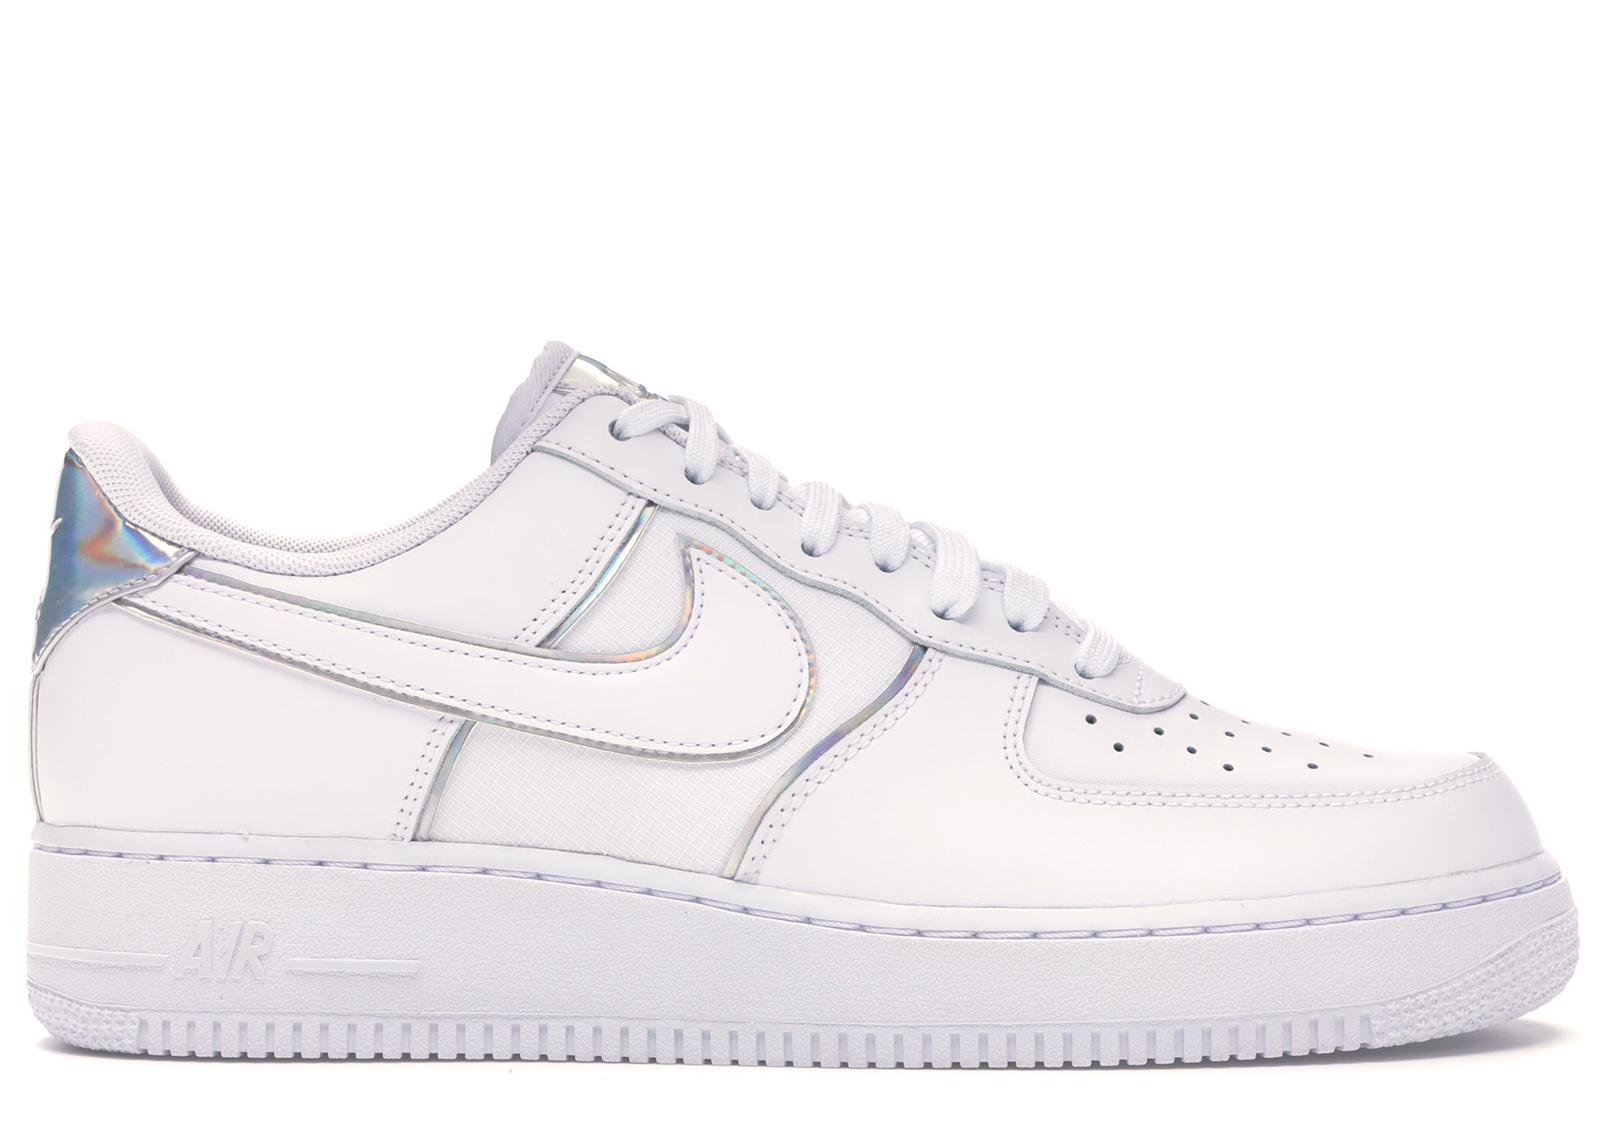 Nike Air Force 1 Low '07 LV8 4 White Silver Men's - AT6147-100 - US